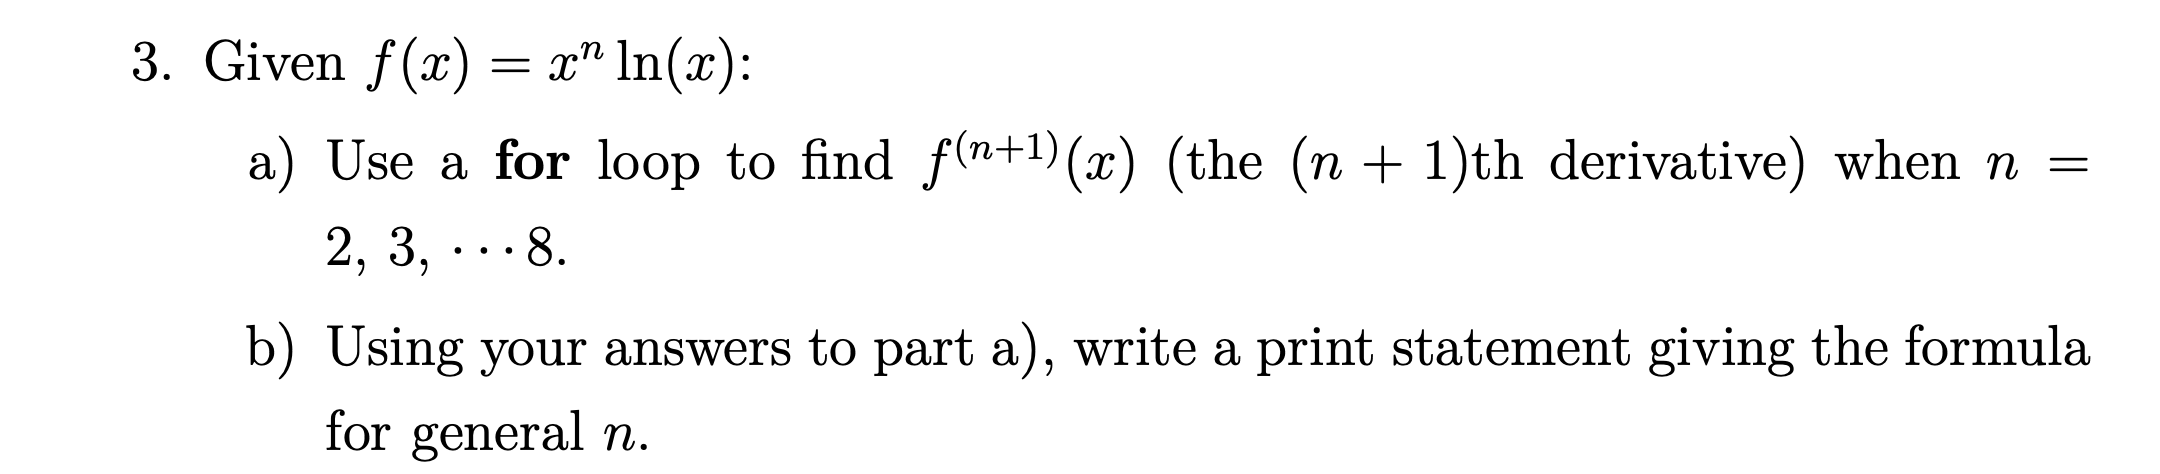 3. Given f(x)
In(r)
a) Use a for loop to find f(n+1) (x) (the (n +1)th derivative) when n =
2, 3,..8
b) Using your answers to part a), write a print statement giving the formula
for
general n.
